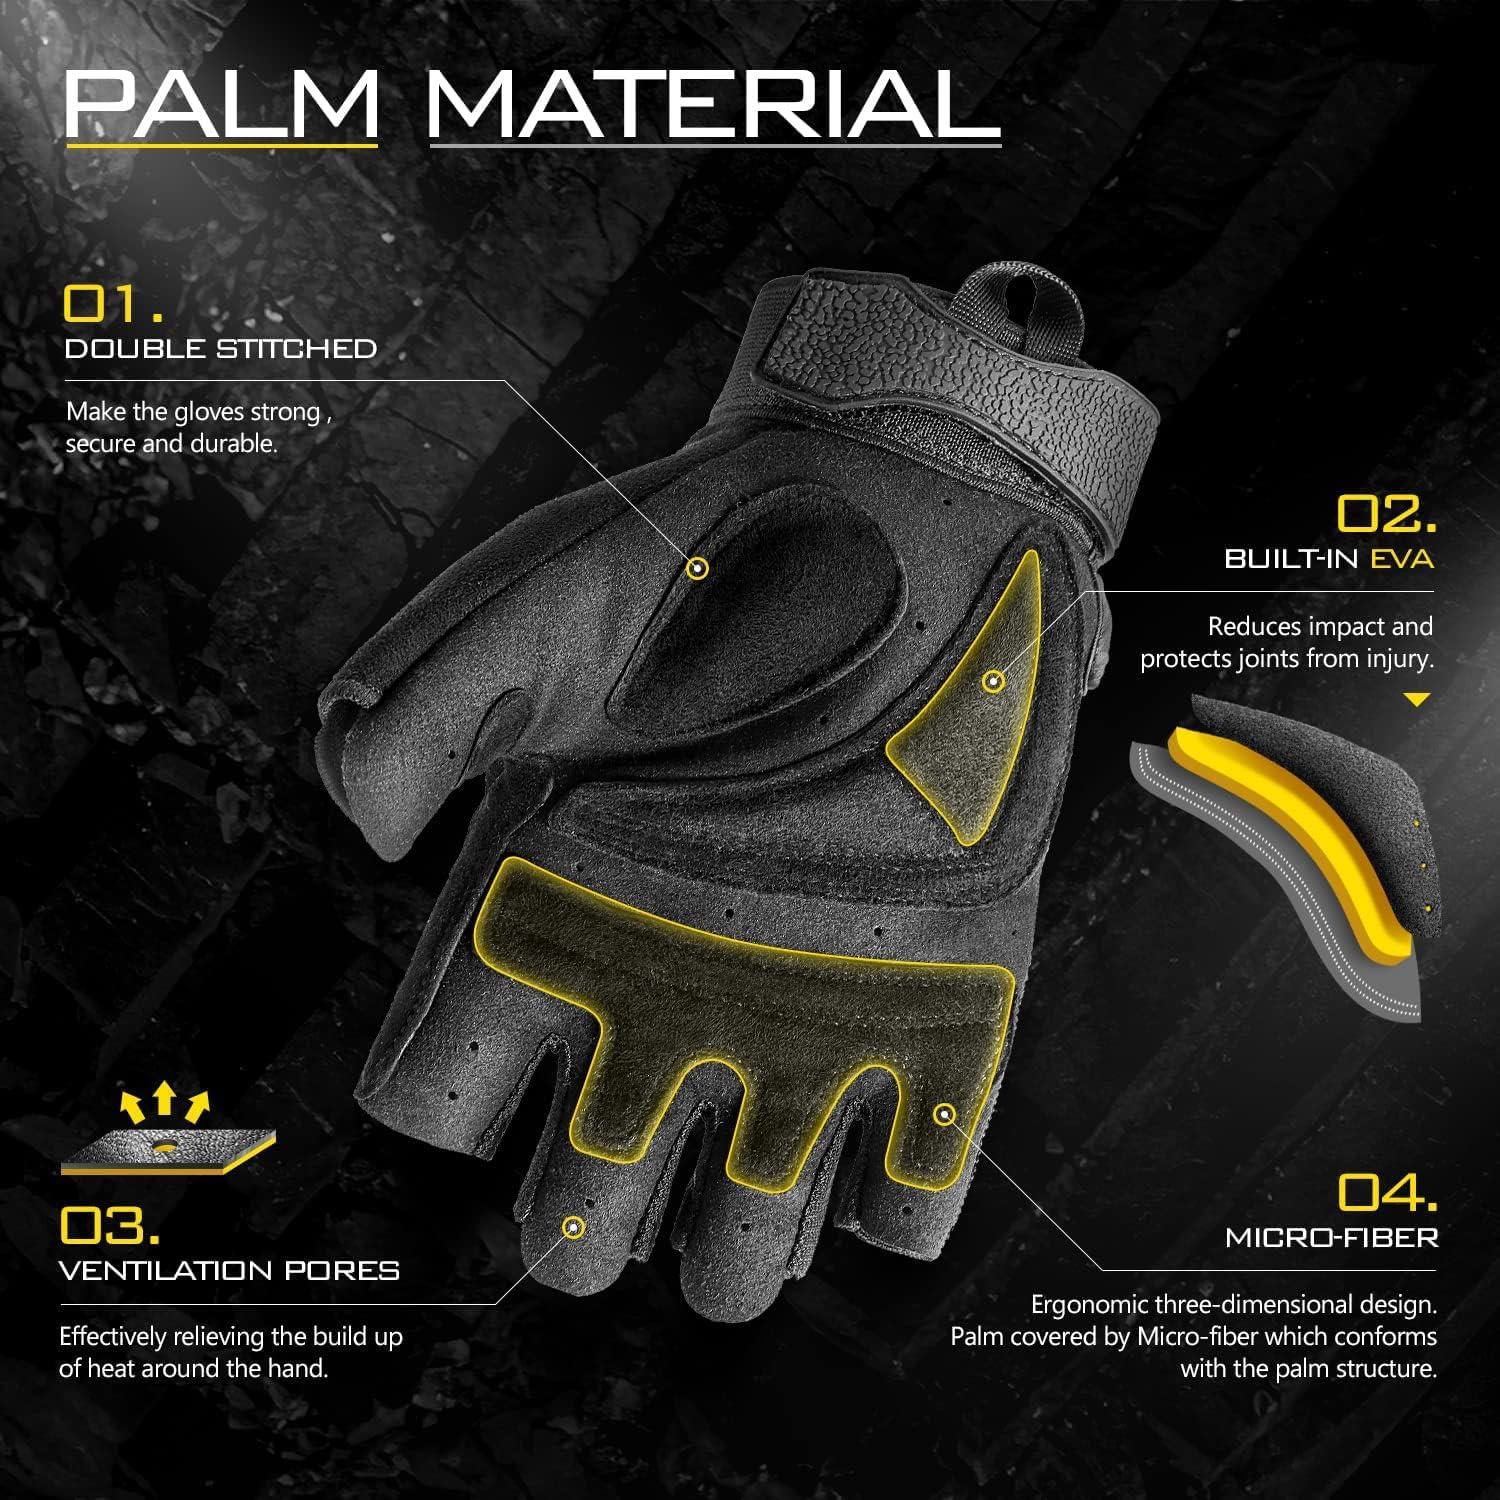 Sport motorcycle glove made of leather for stength and durability